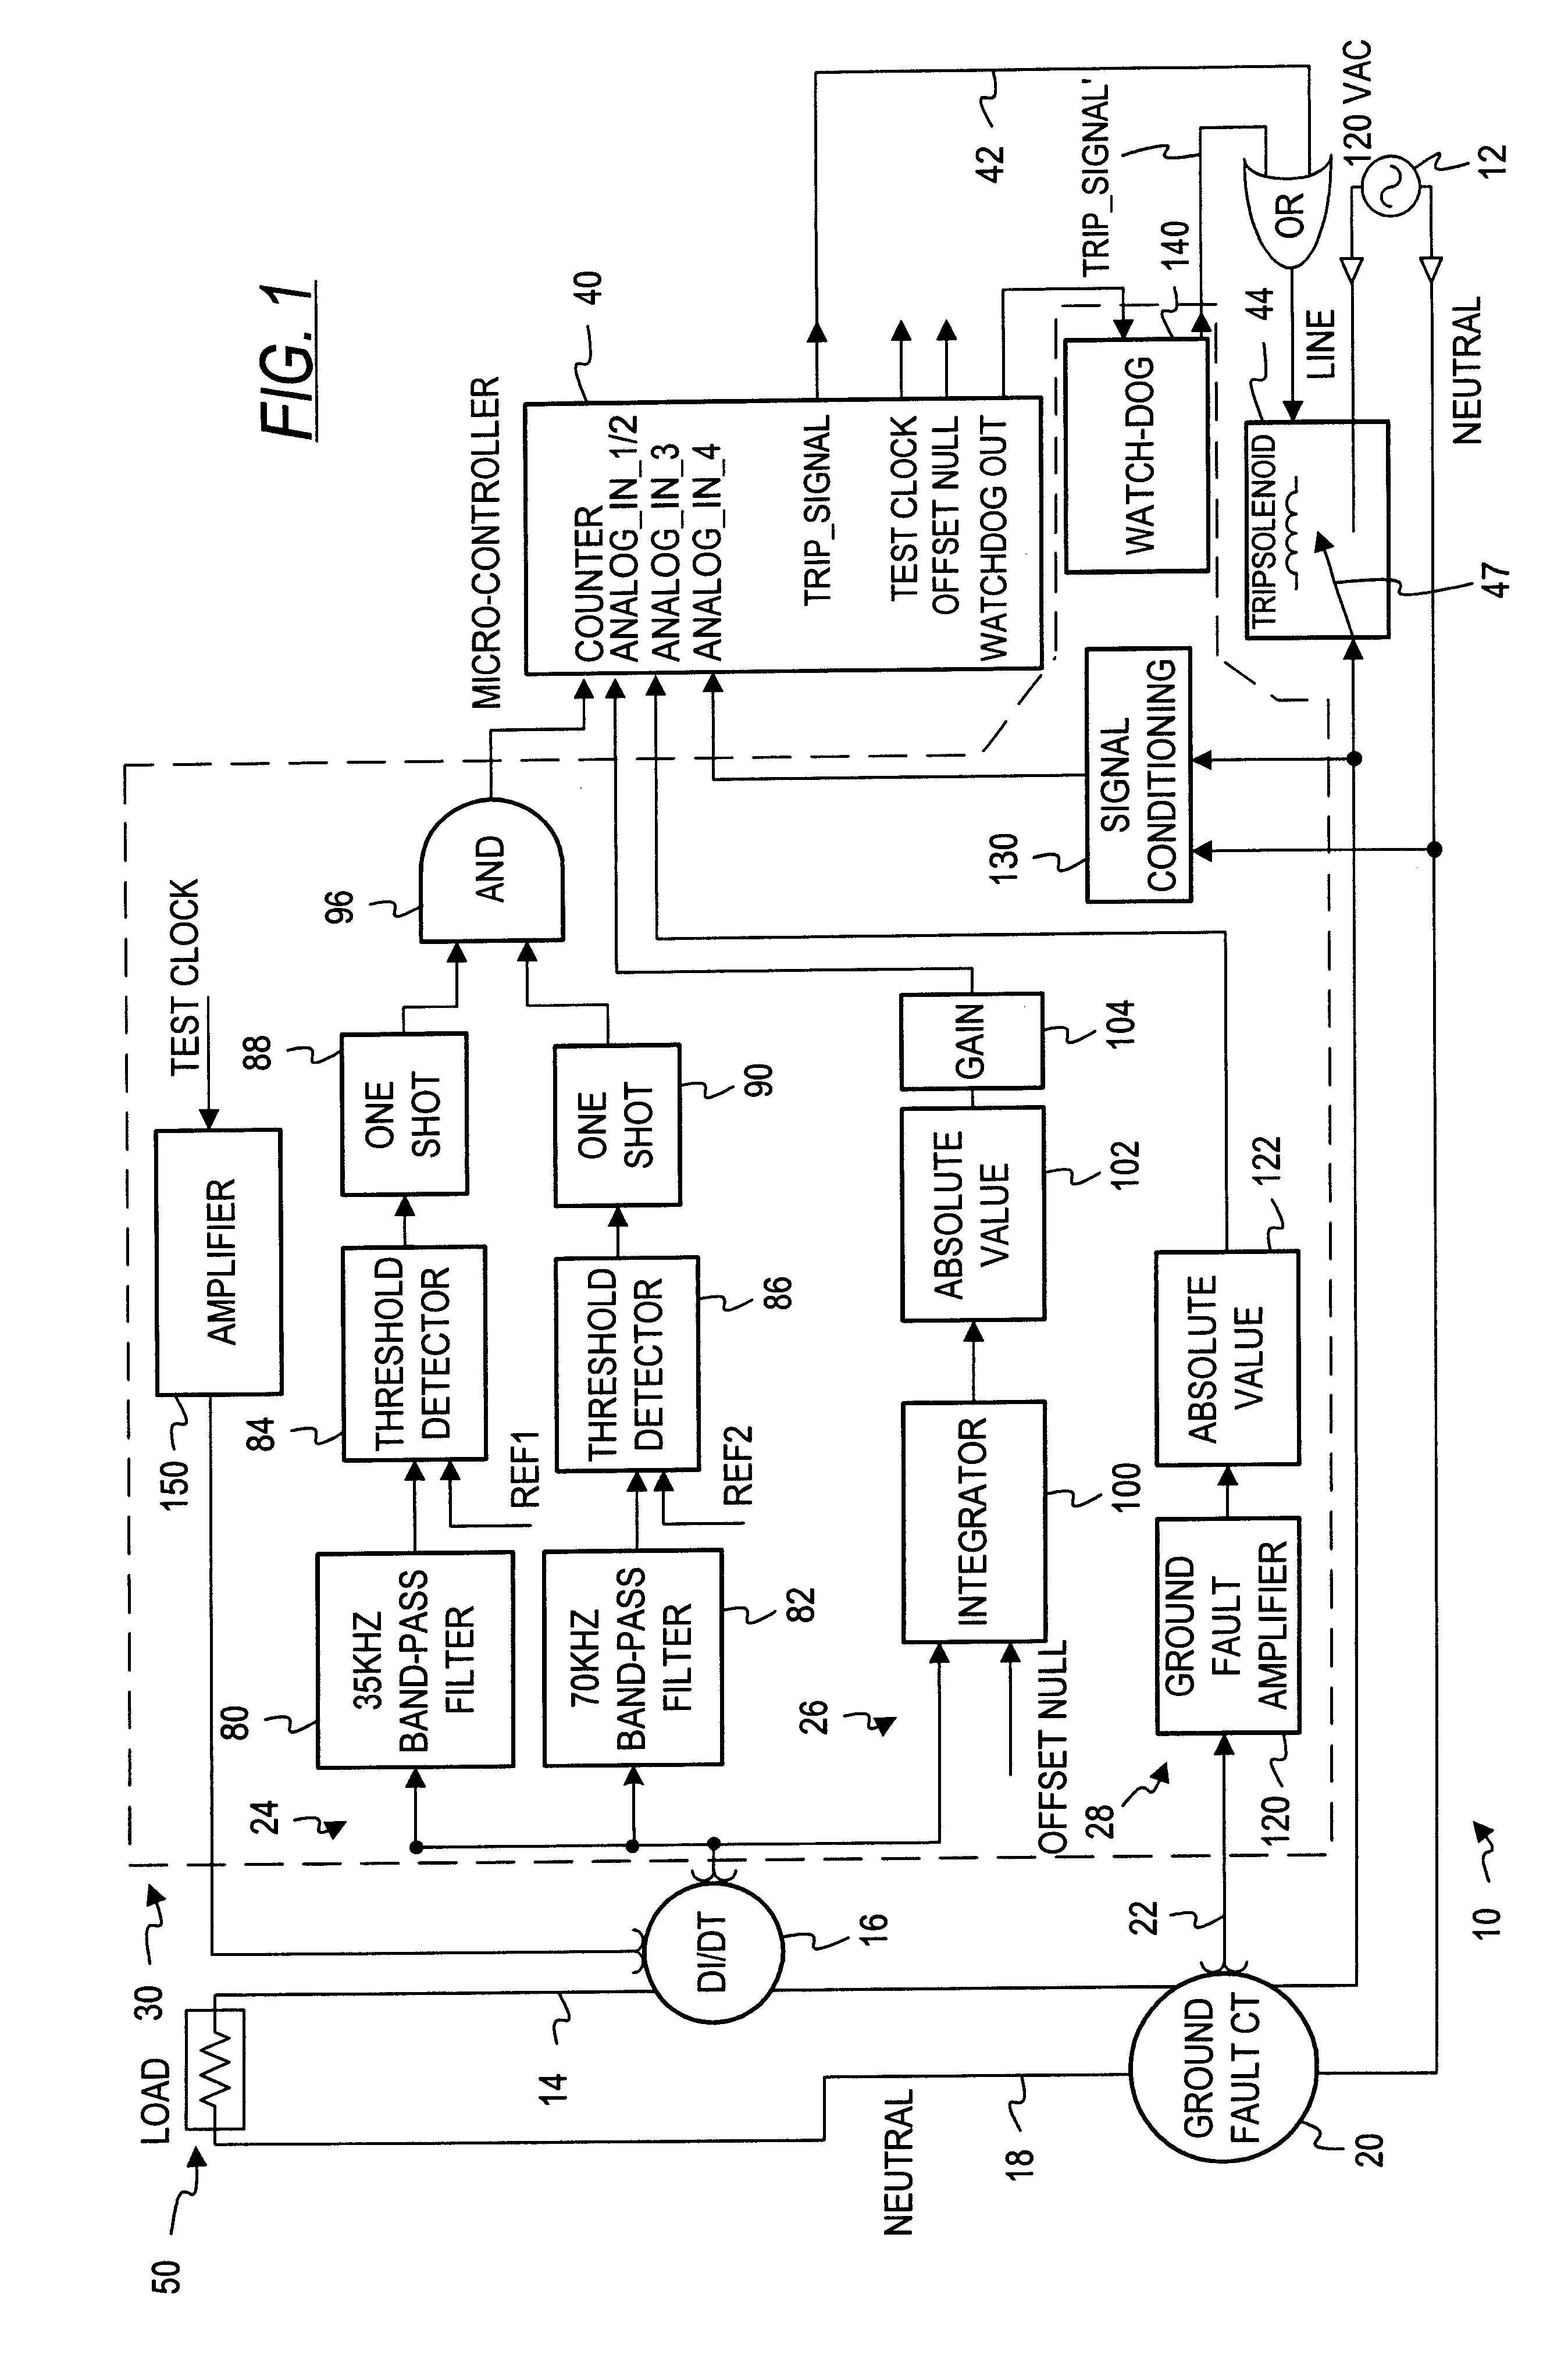 Electrical fault detection system